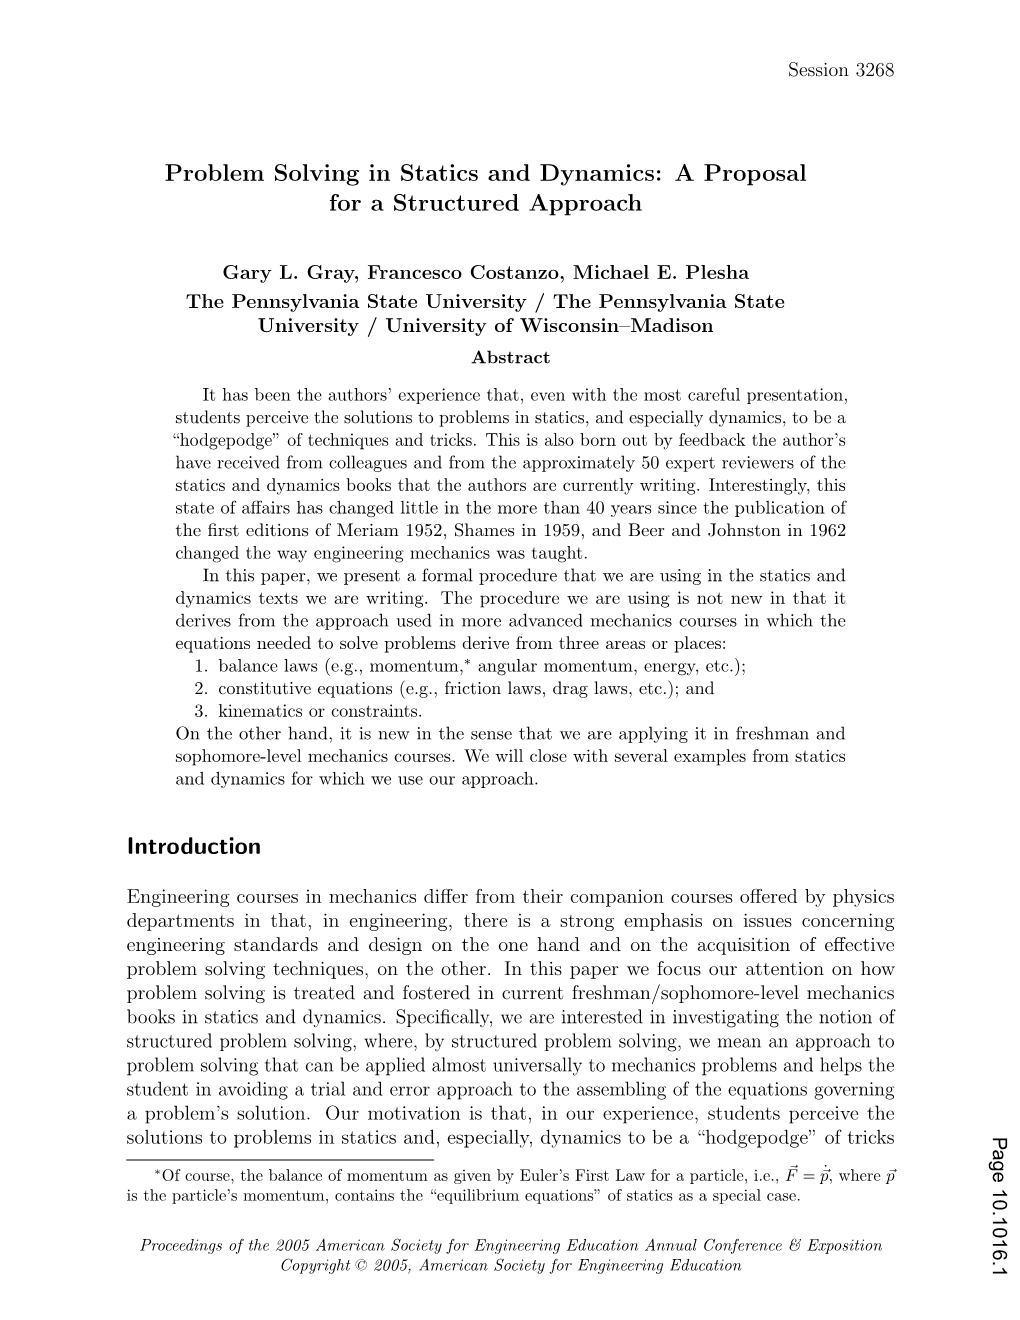 Problem Solving in Statics and Dynamics: a Proposal for a Structured Approach